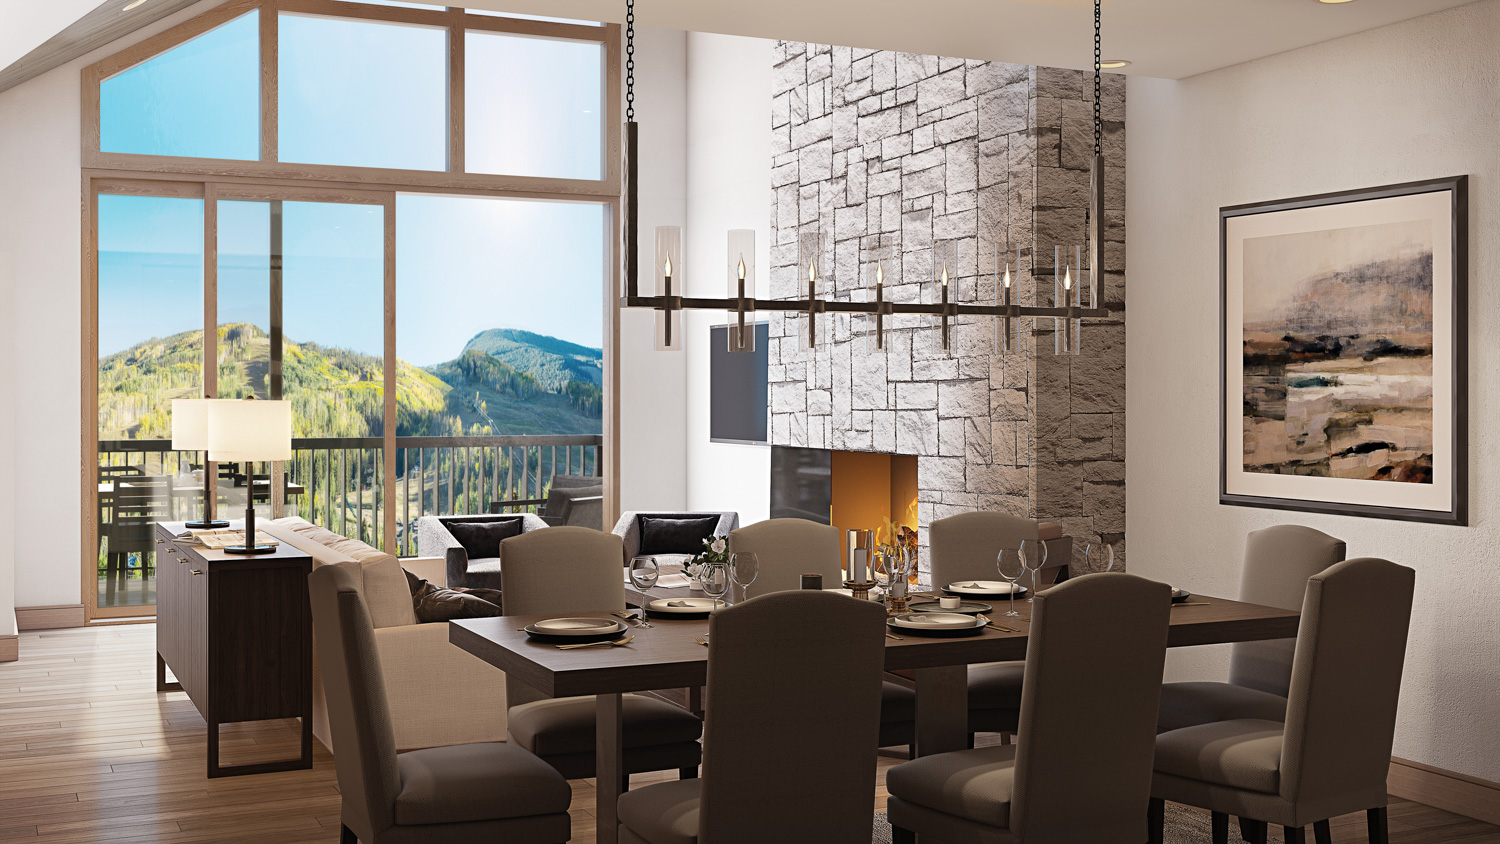 Rendering of a dining room and adjacent living room with mountain views.